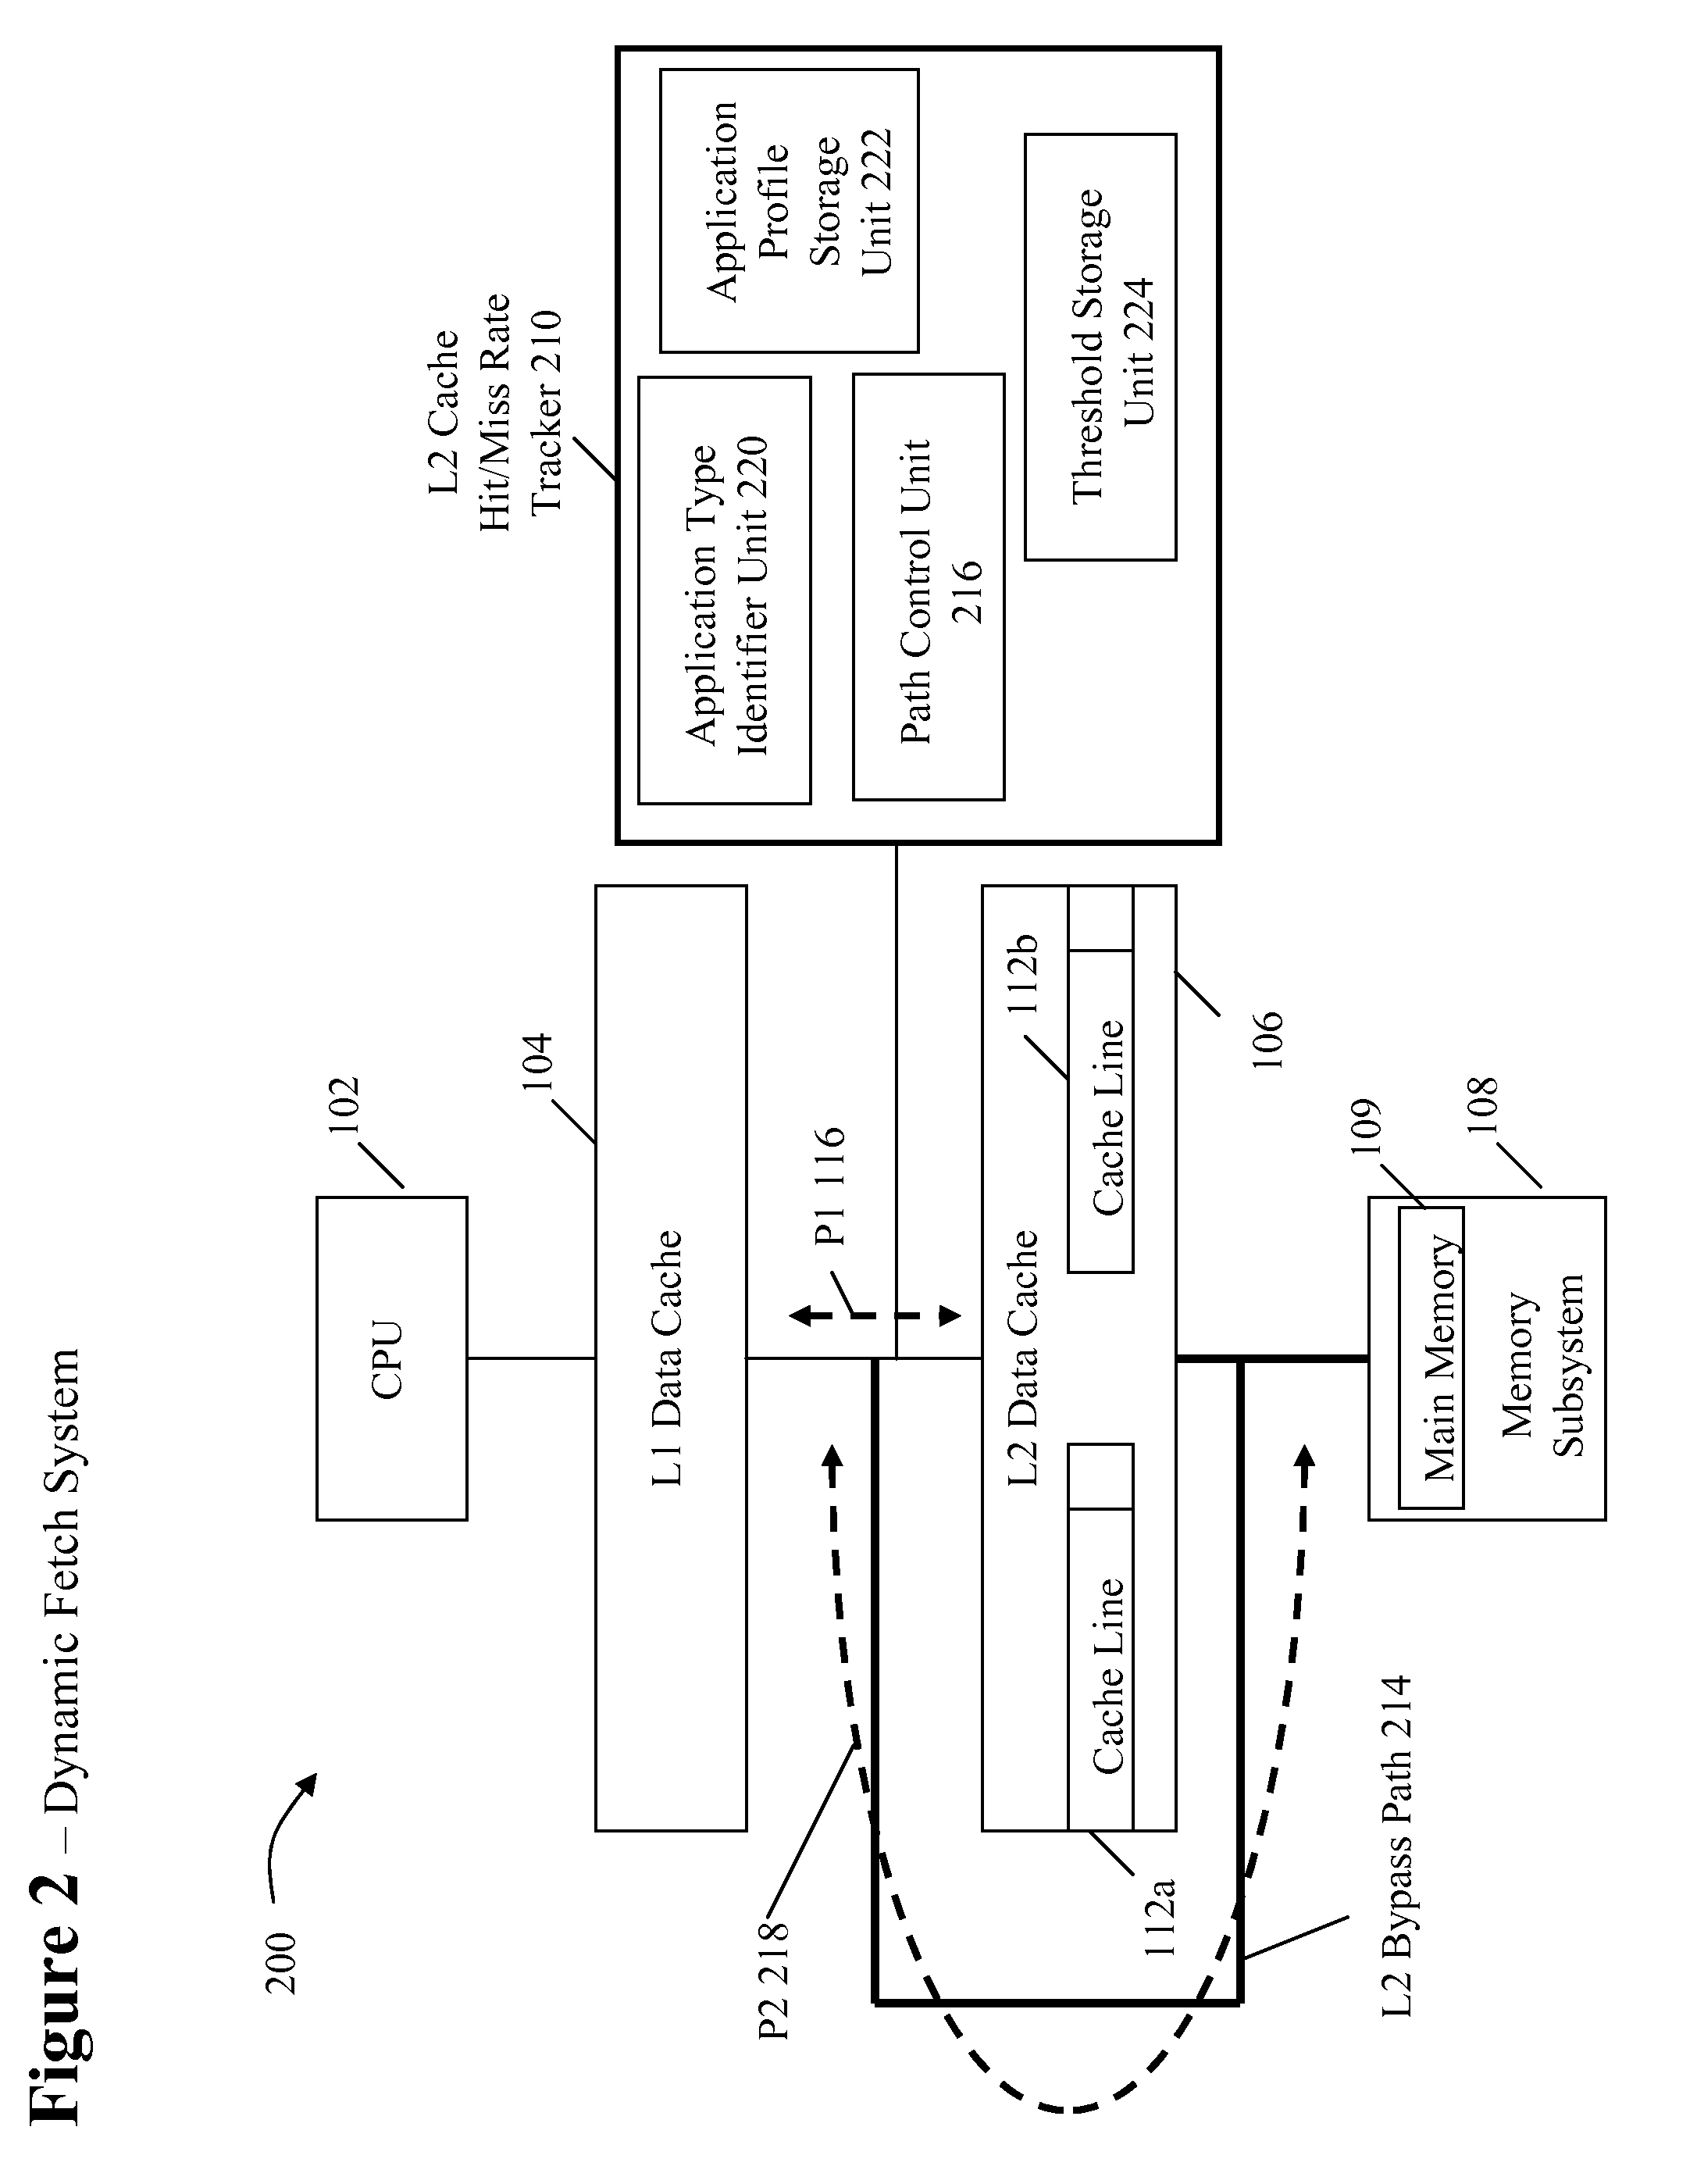 System and method for dynamically selecting the fetch path of data for improving processor performance